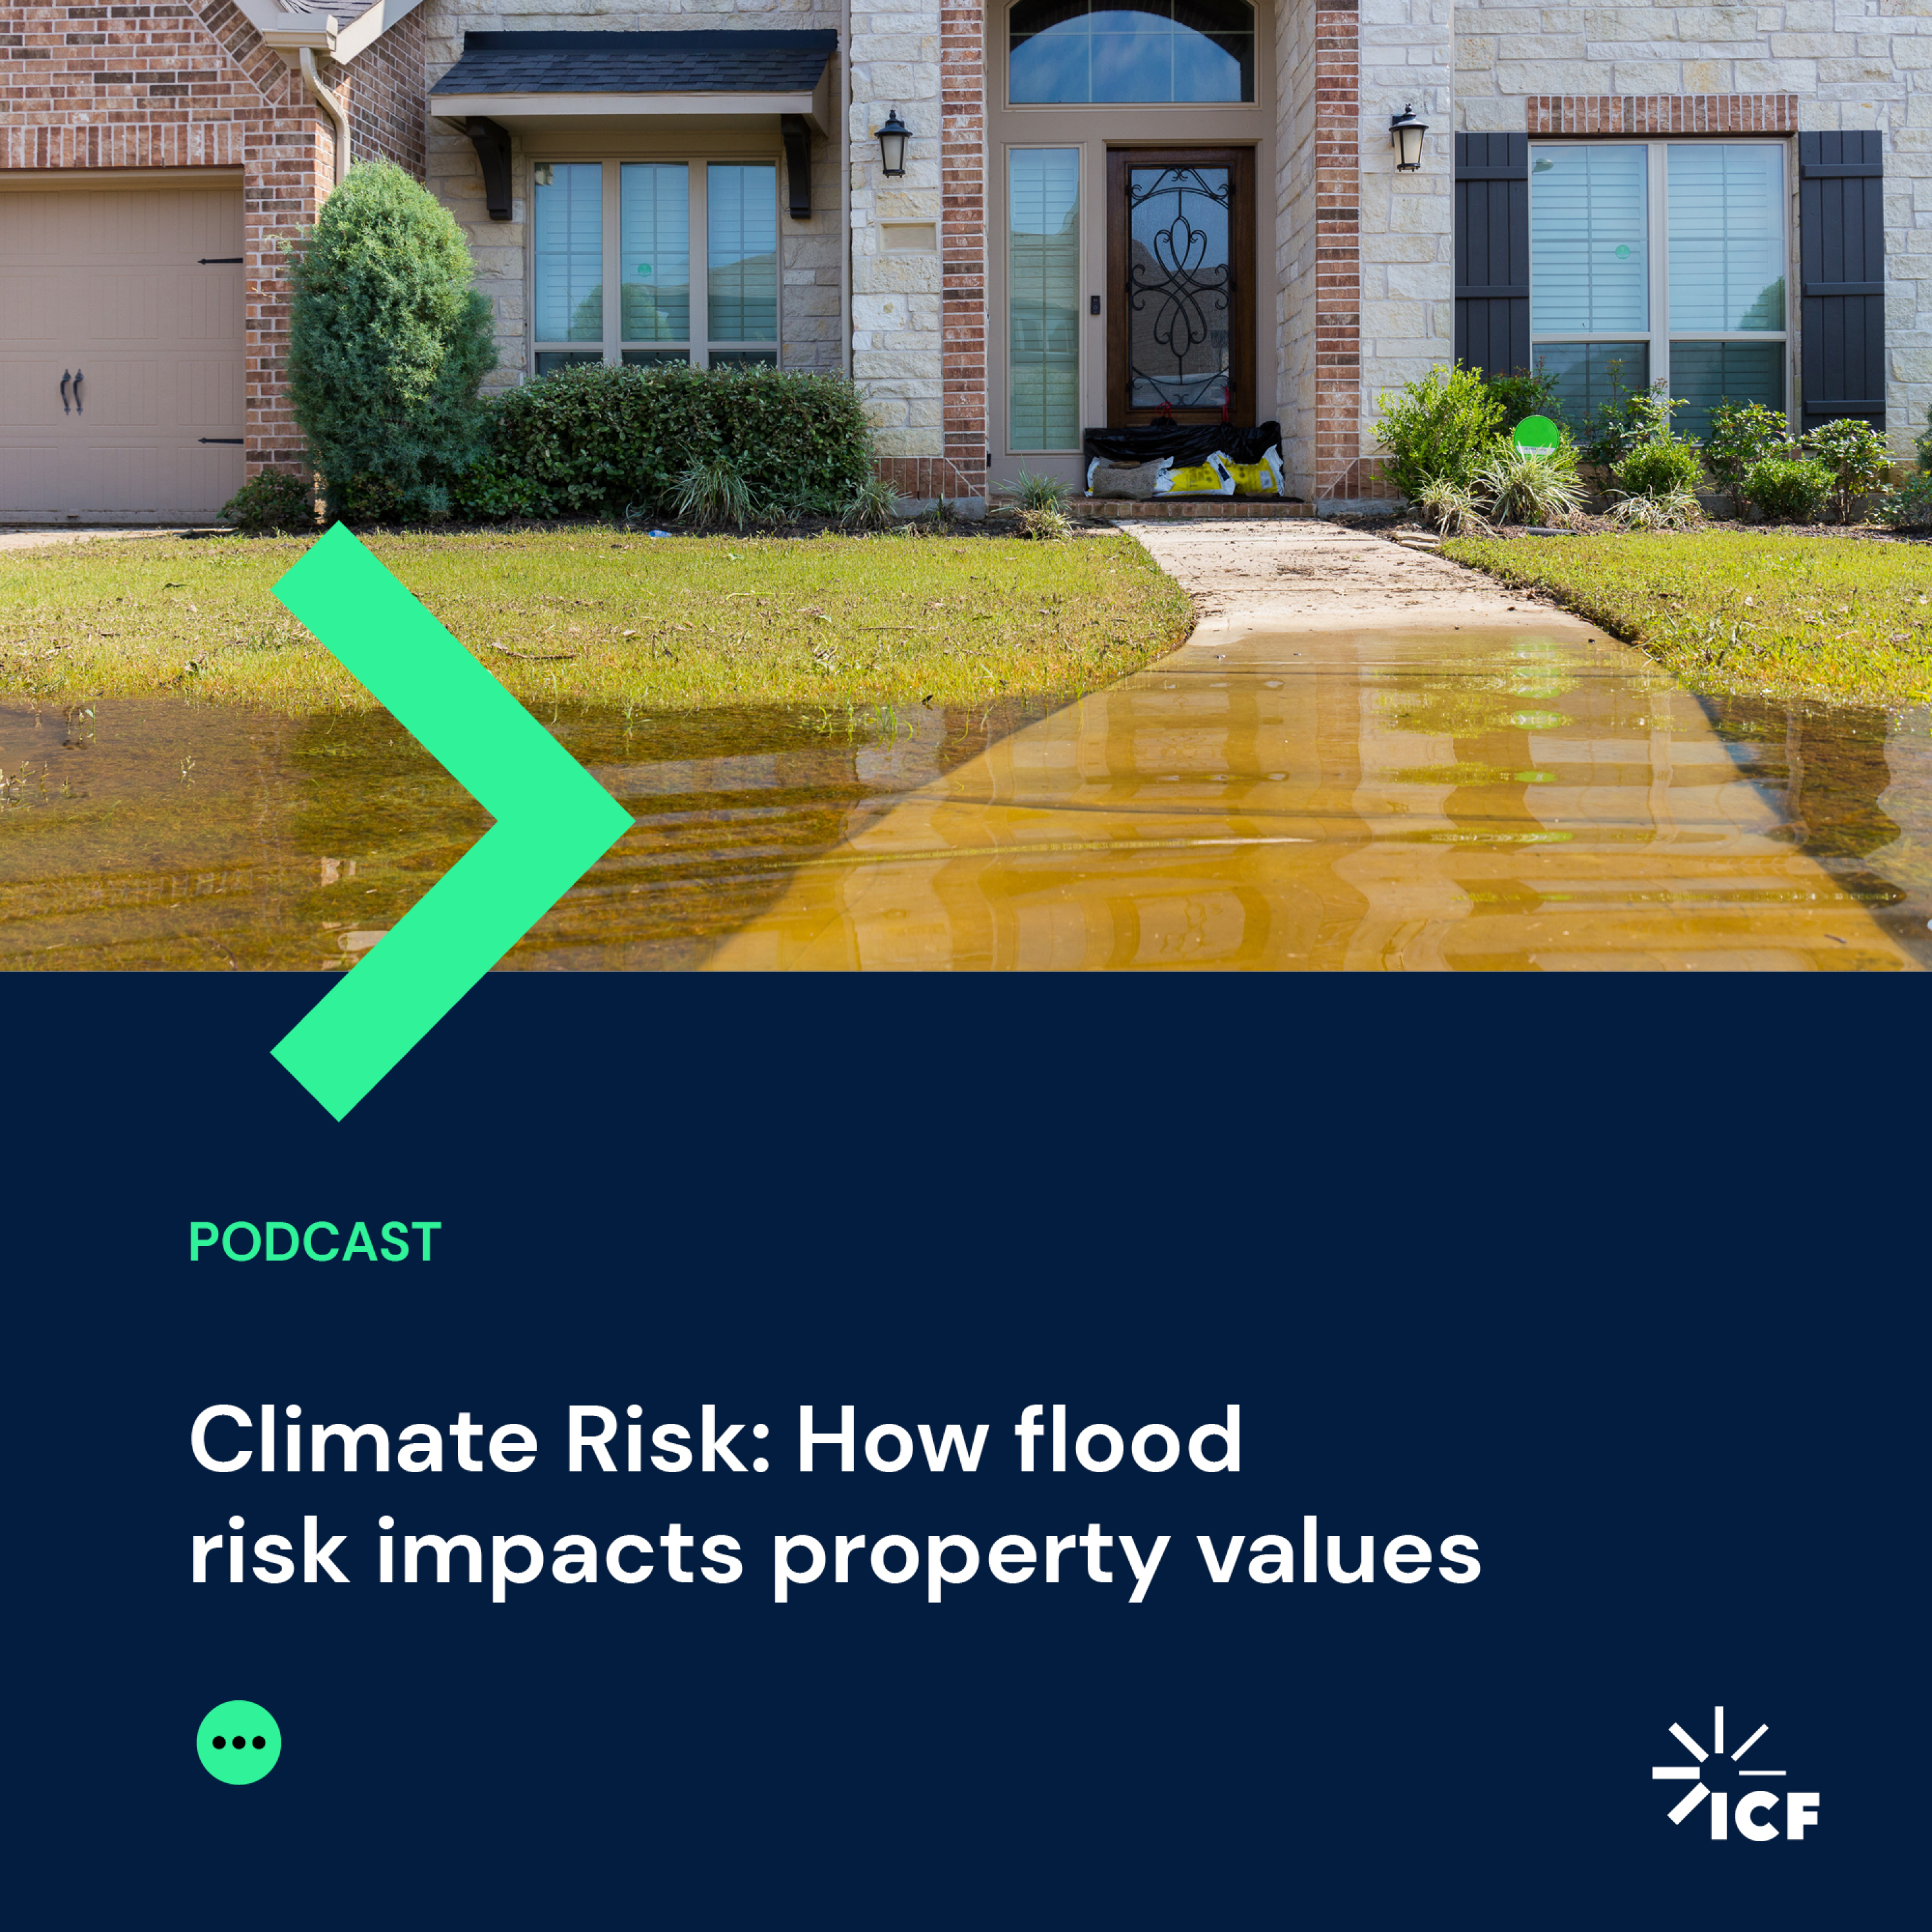 Climate Risk: How Flood Risk Impacts Property Values